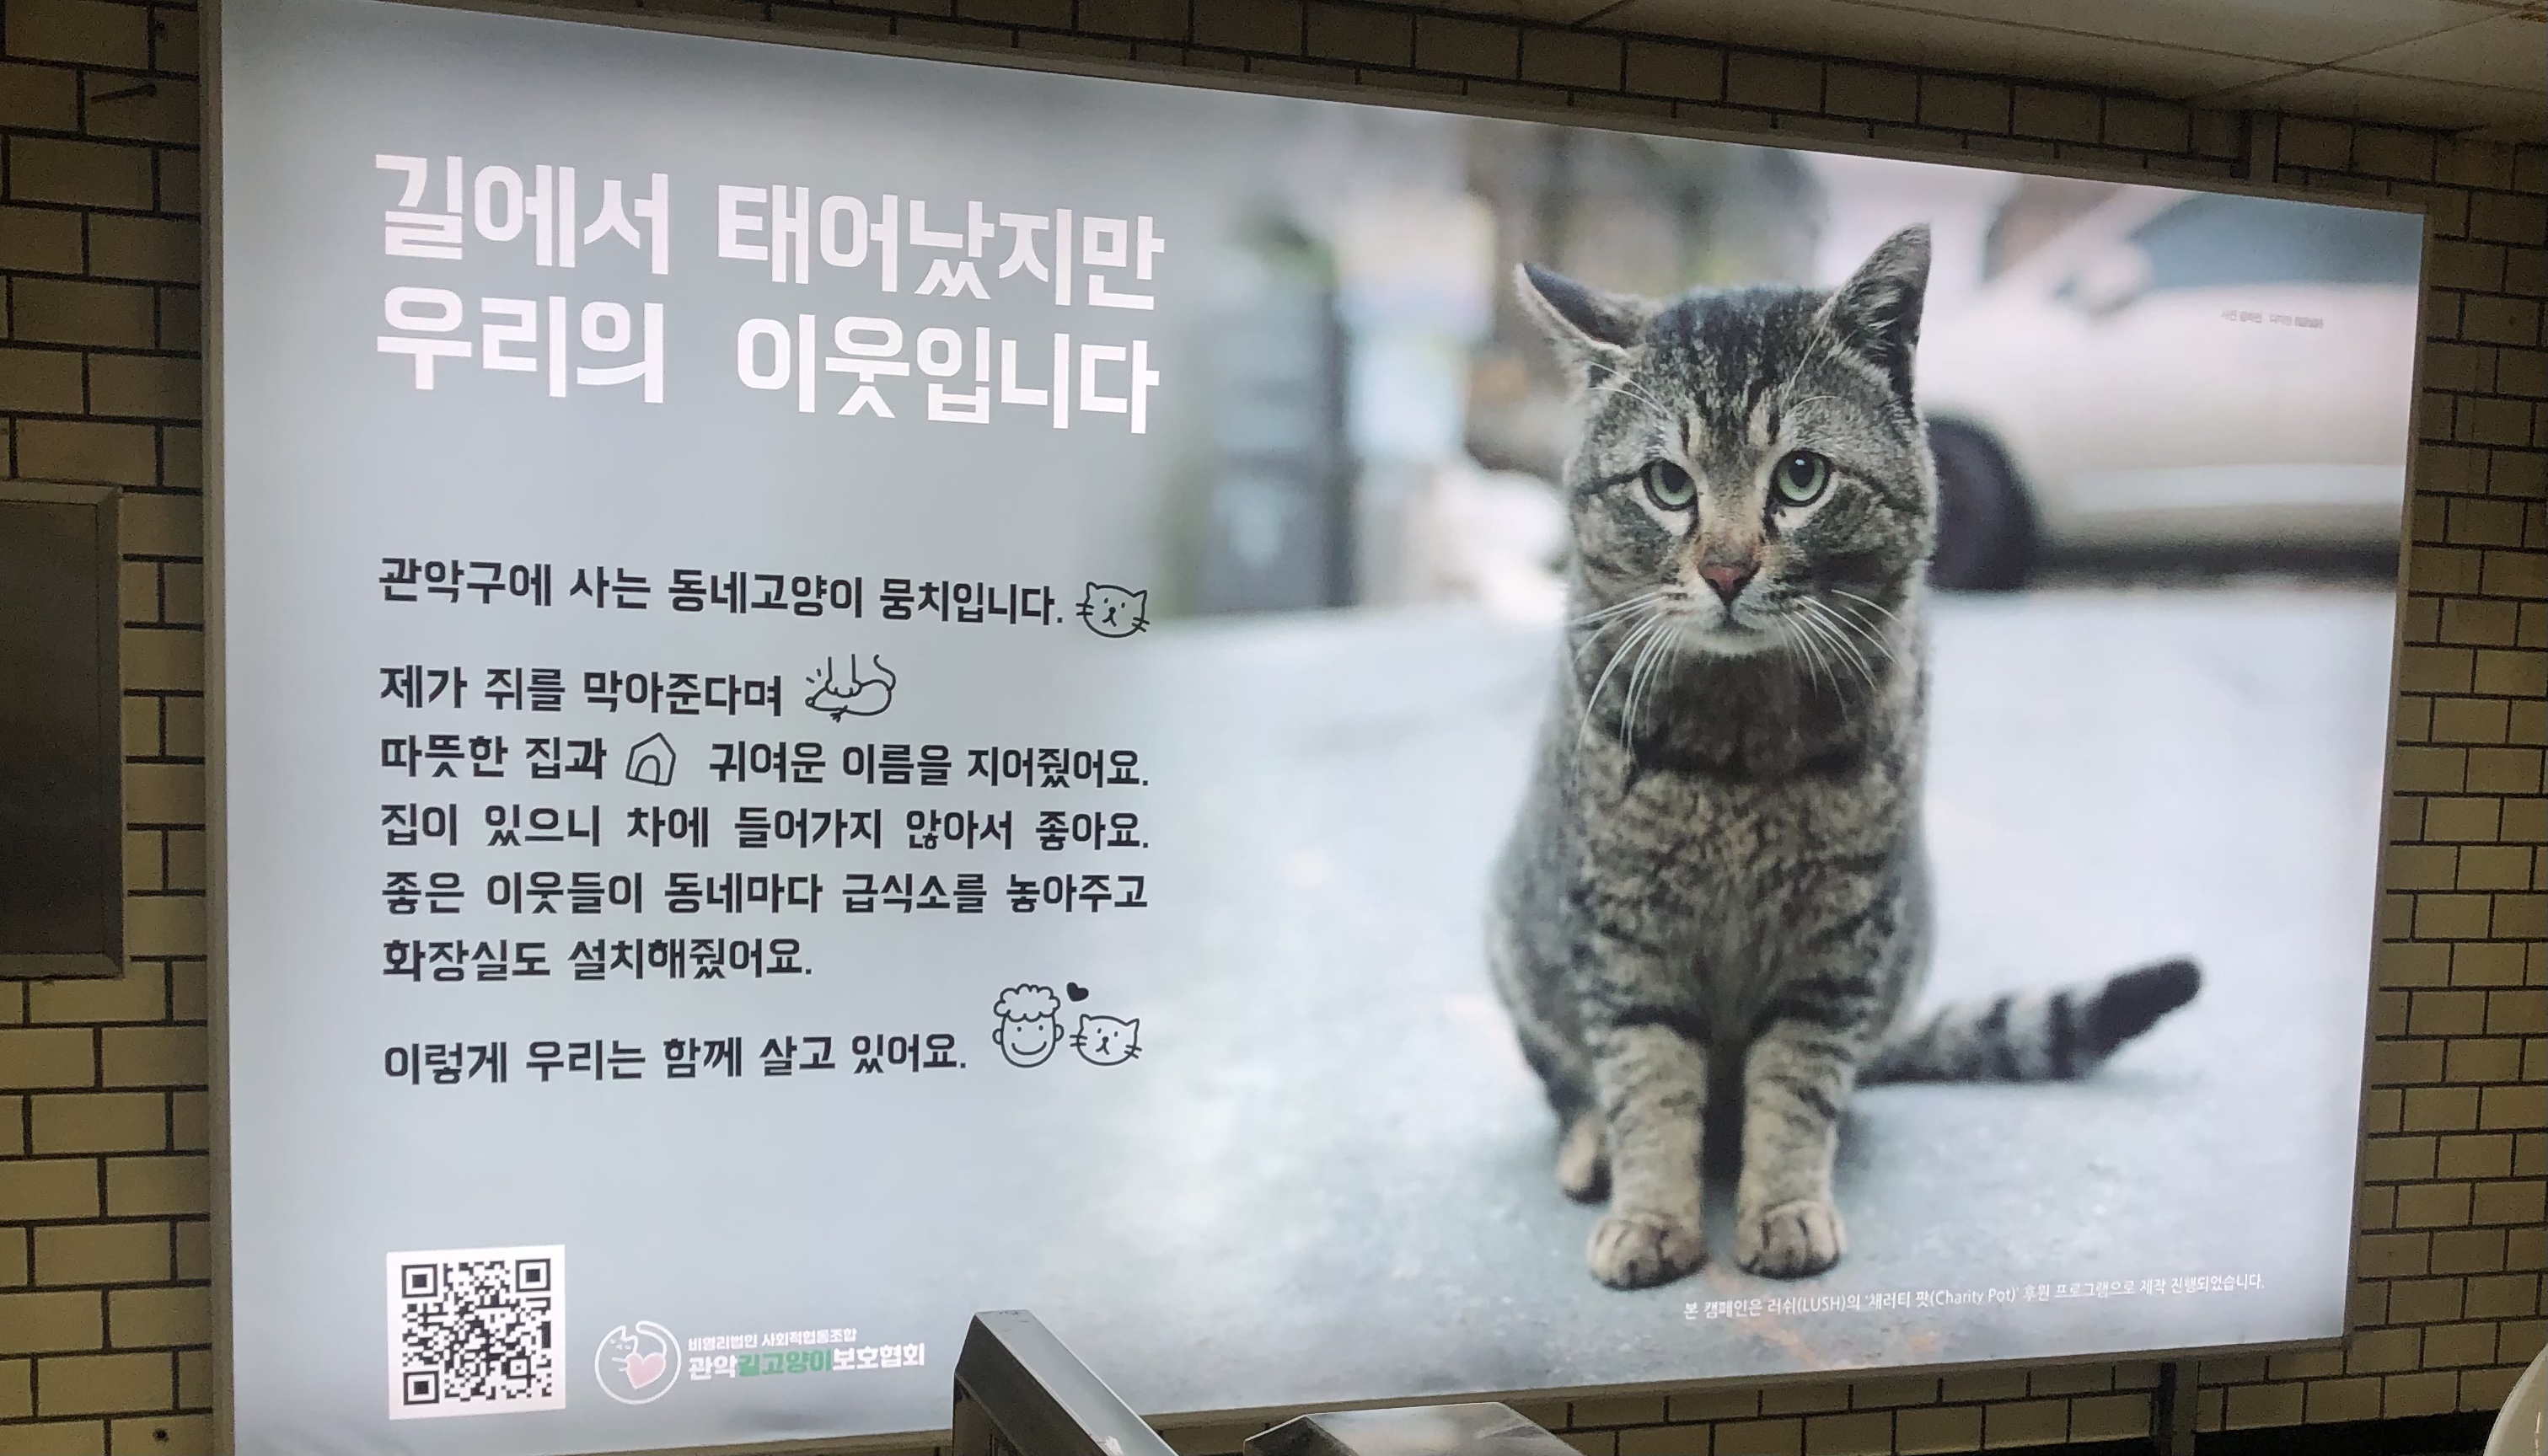 I saw a commercial made by Cat Mom Association on the subway.